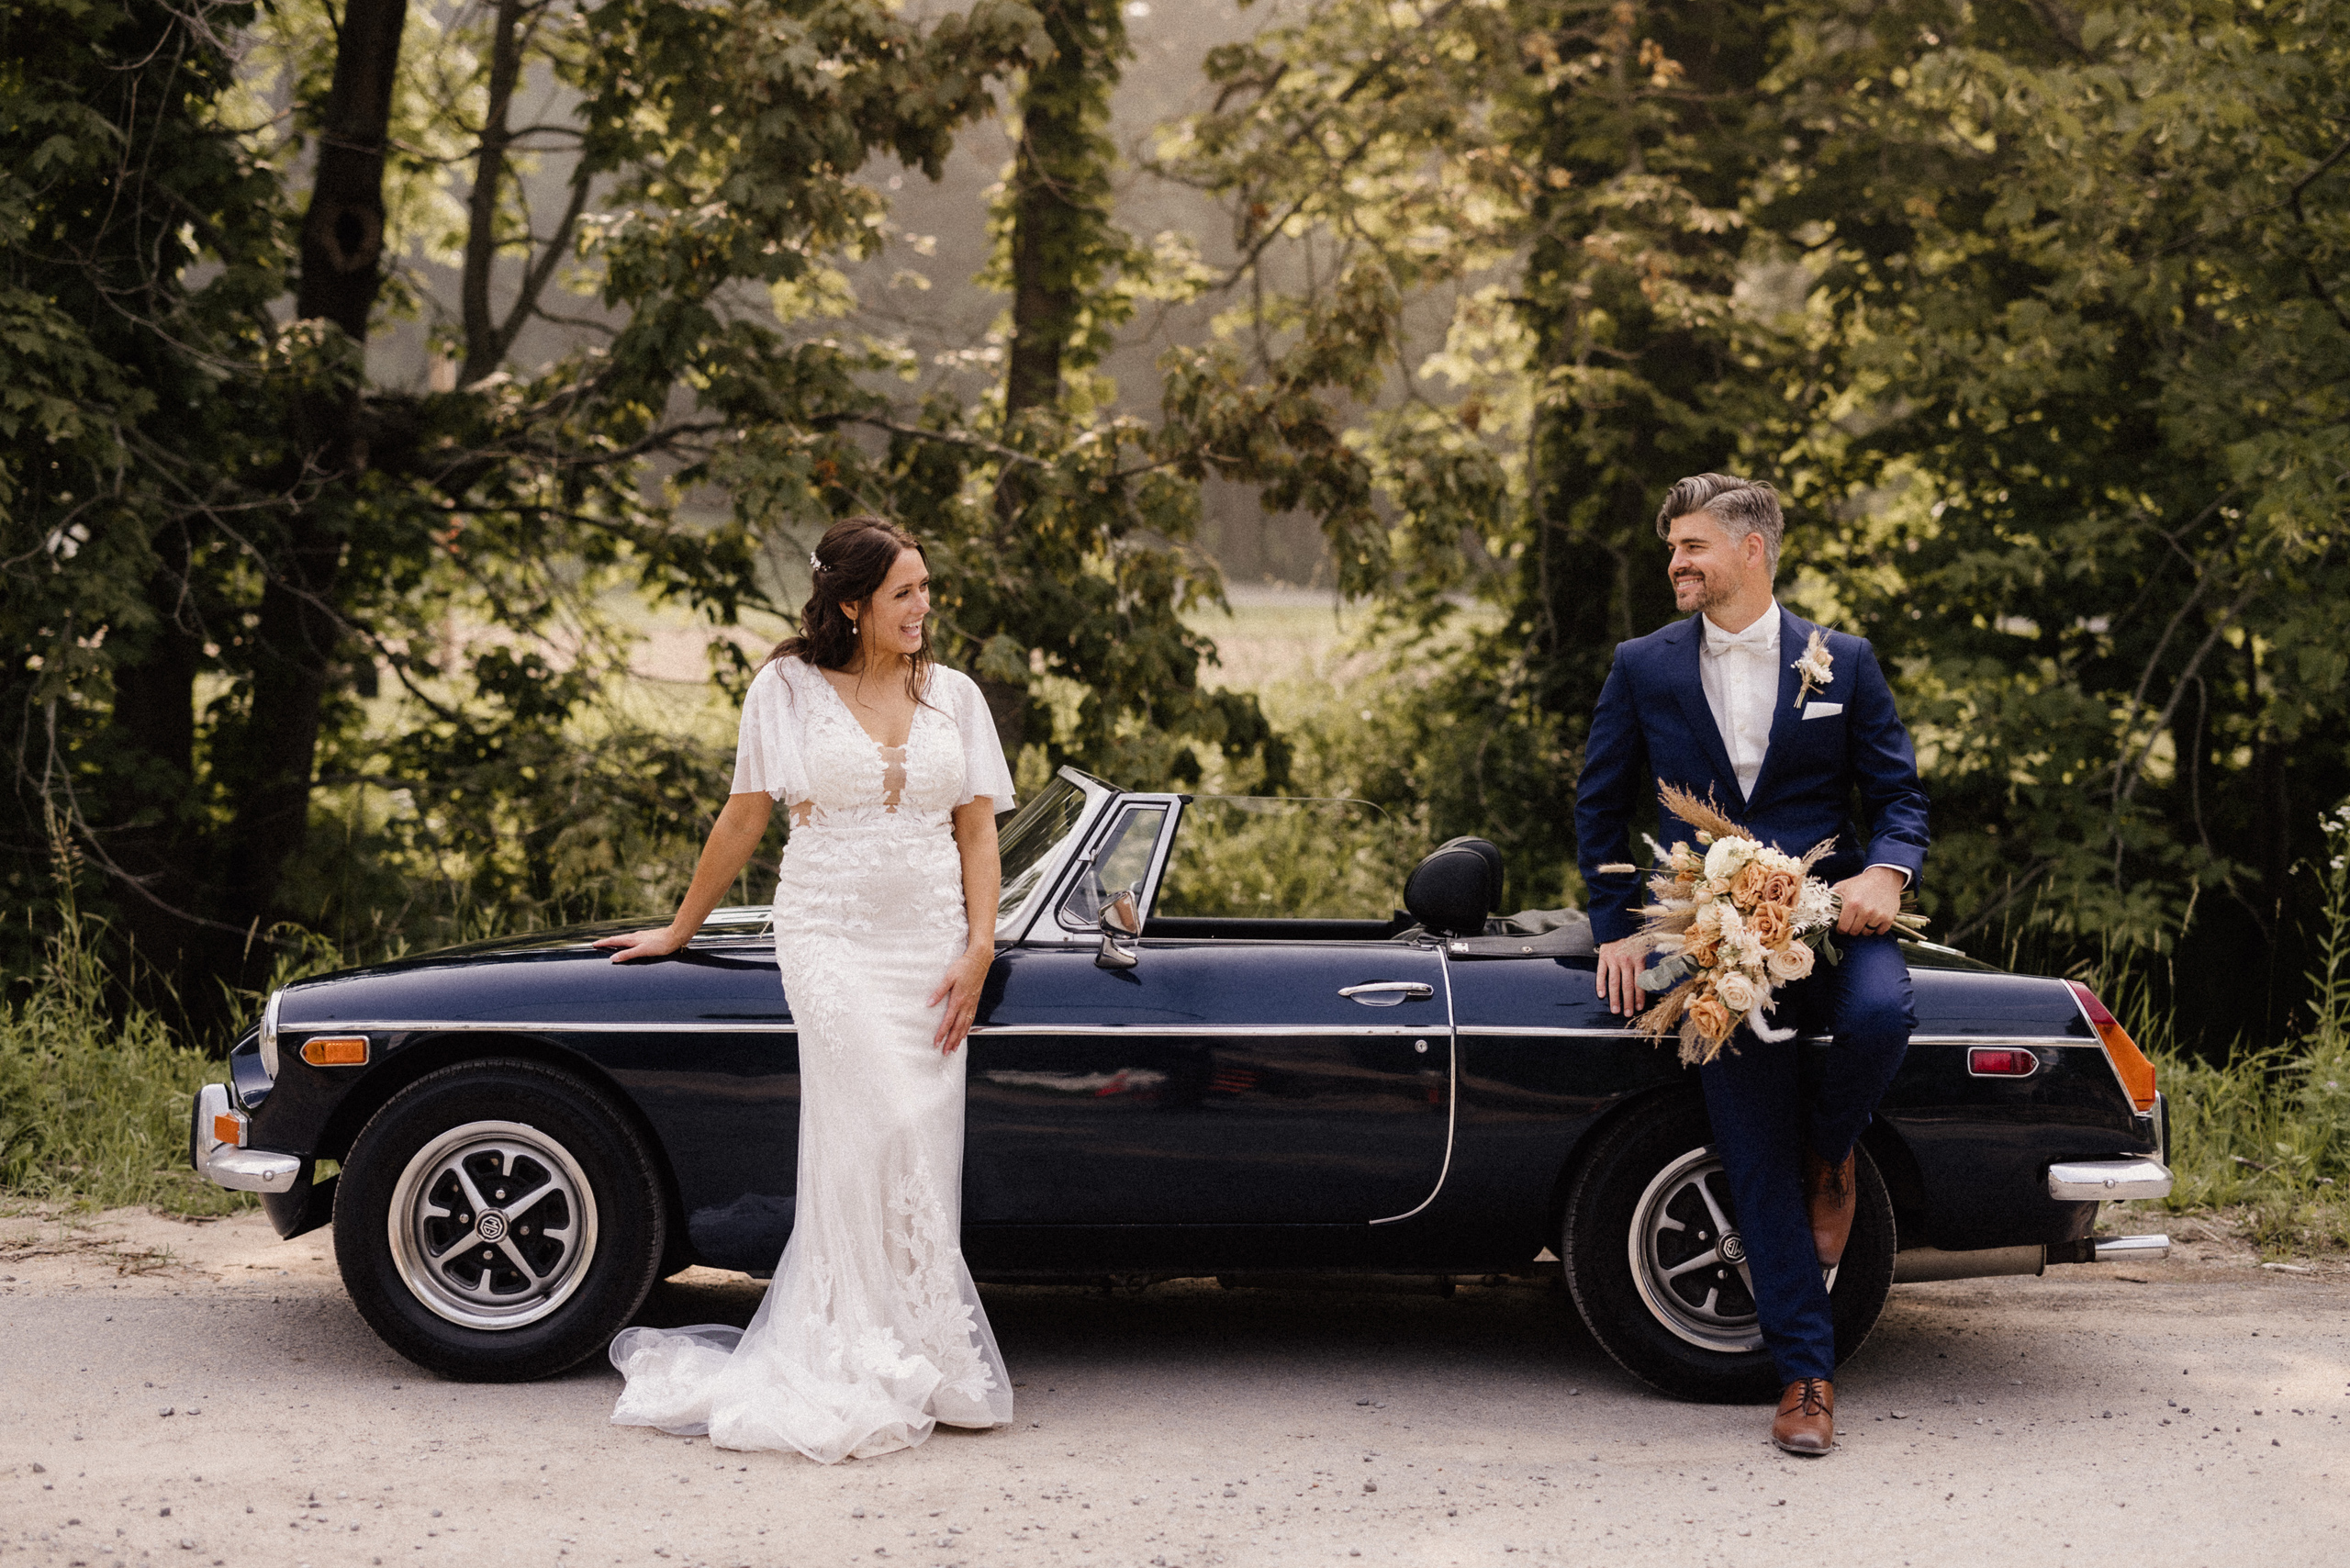 classic car bride groom wedding photographer afterglow images